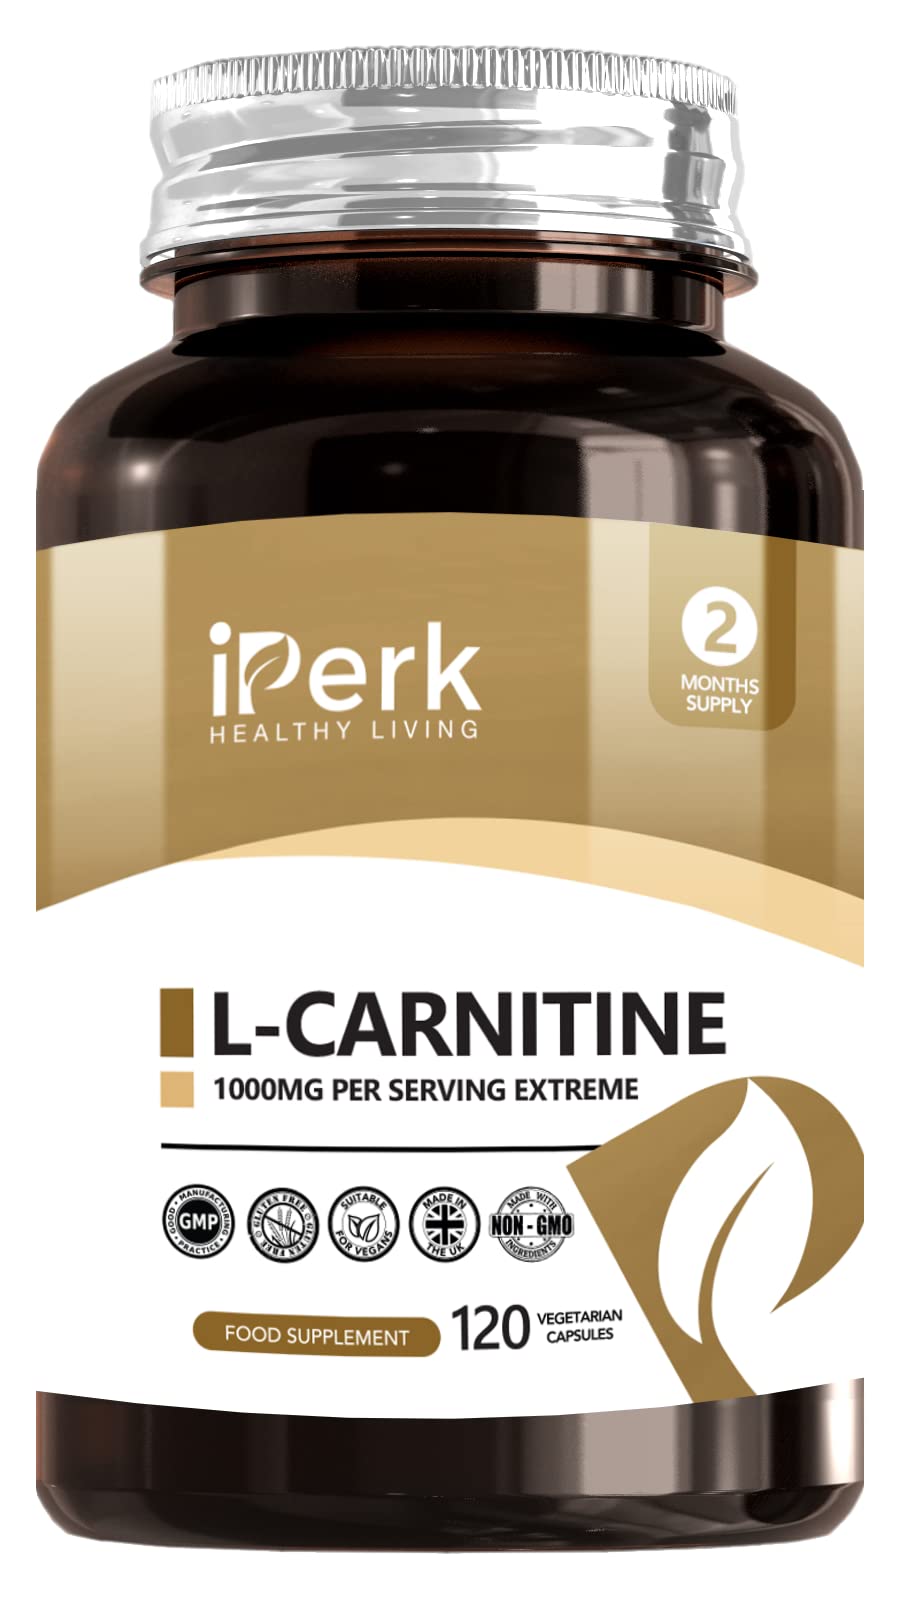 [Australia] - iperk L-Carnitine 1000mg per Servings | 120 Vegan Capsules | High Strength Non-GMO, Gluten Free Supplement | Supports Fat Loss, Performance & Recovery | 2 Months Supply 